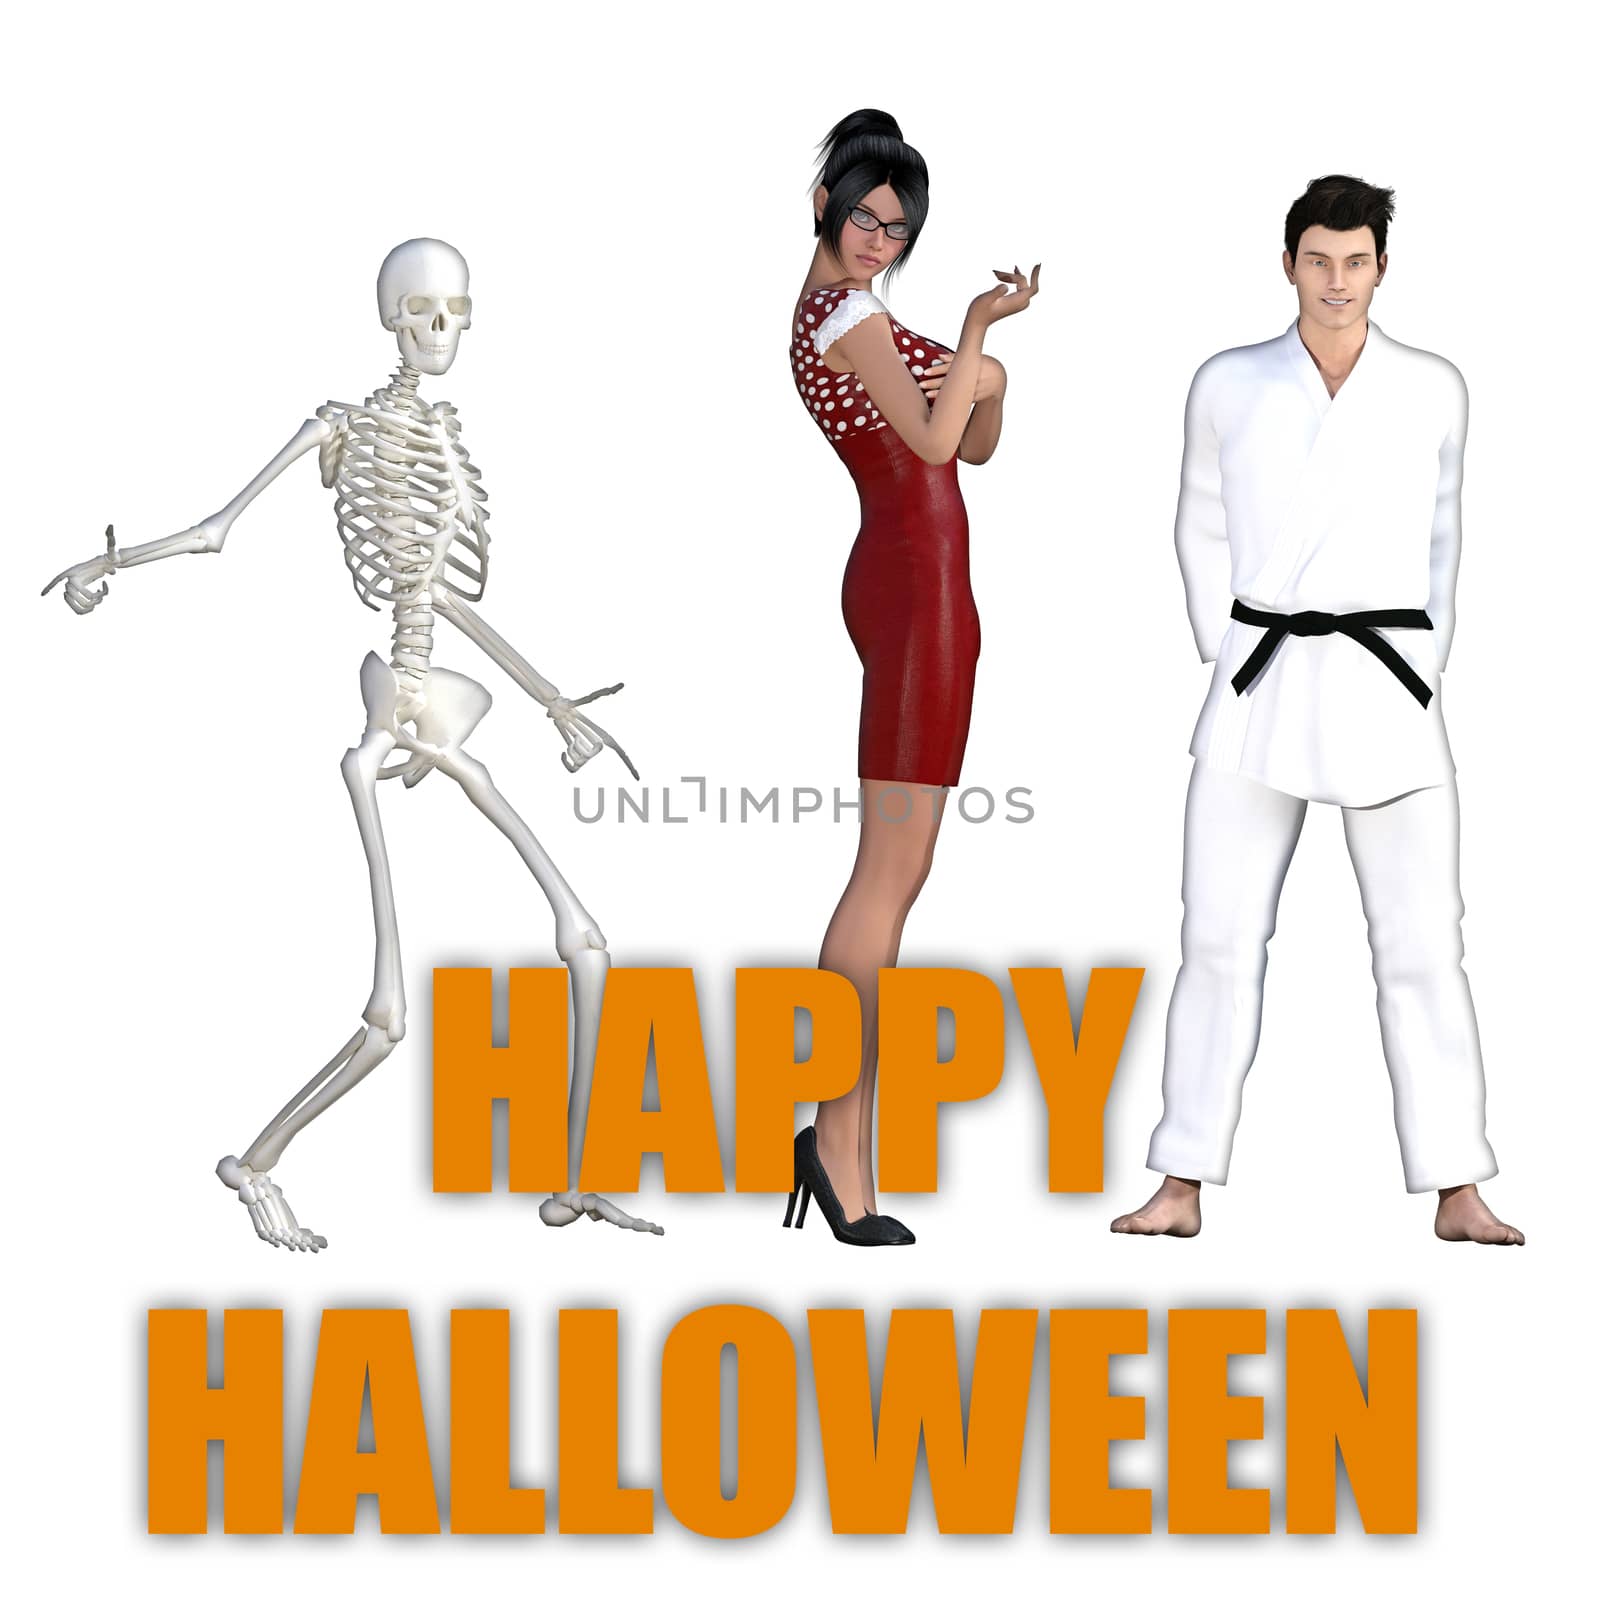 Happy Halloween Greeting Card With Costume Art